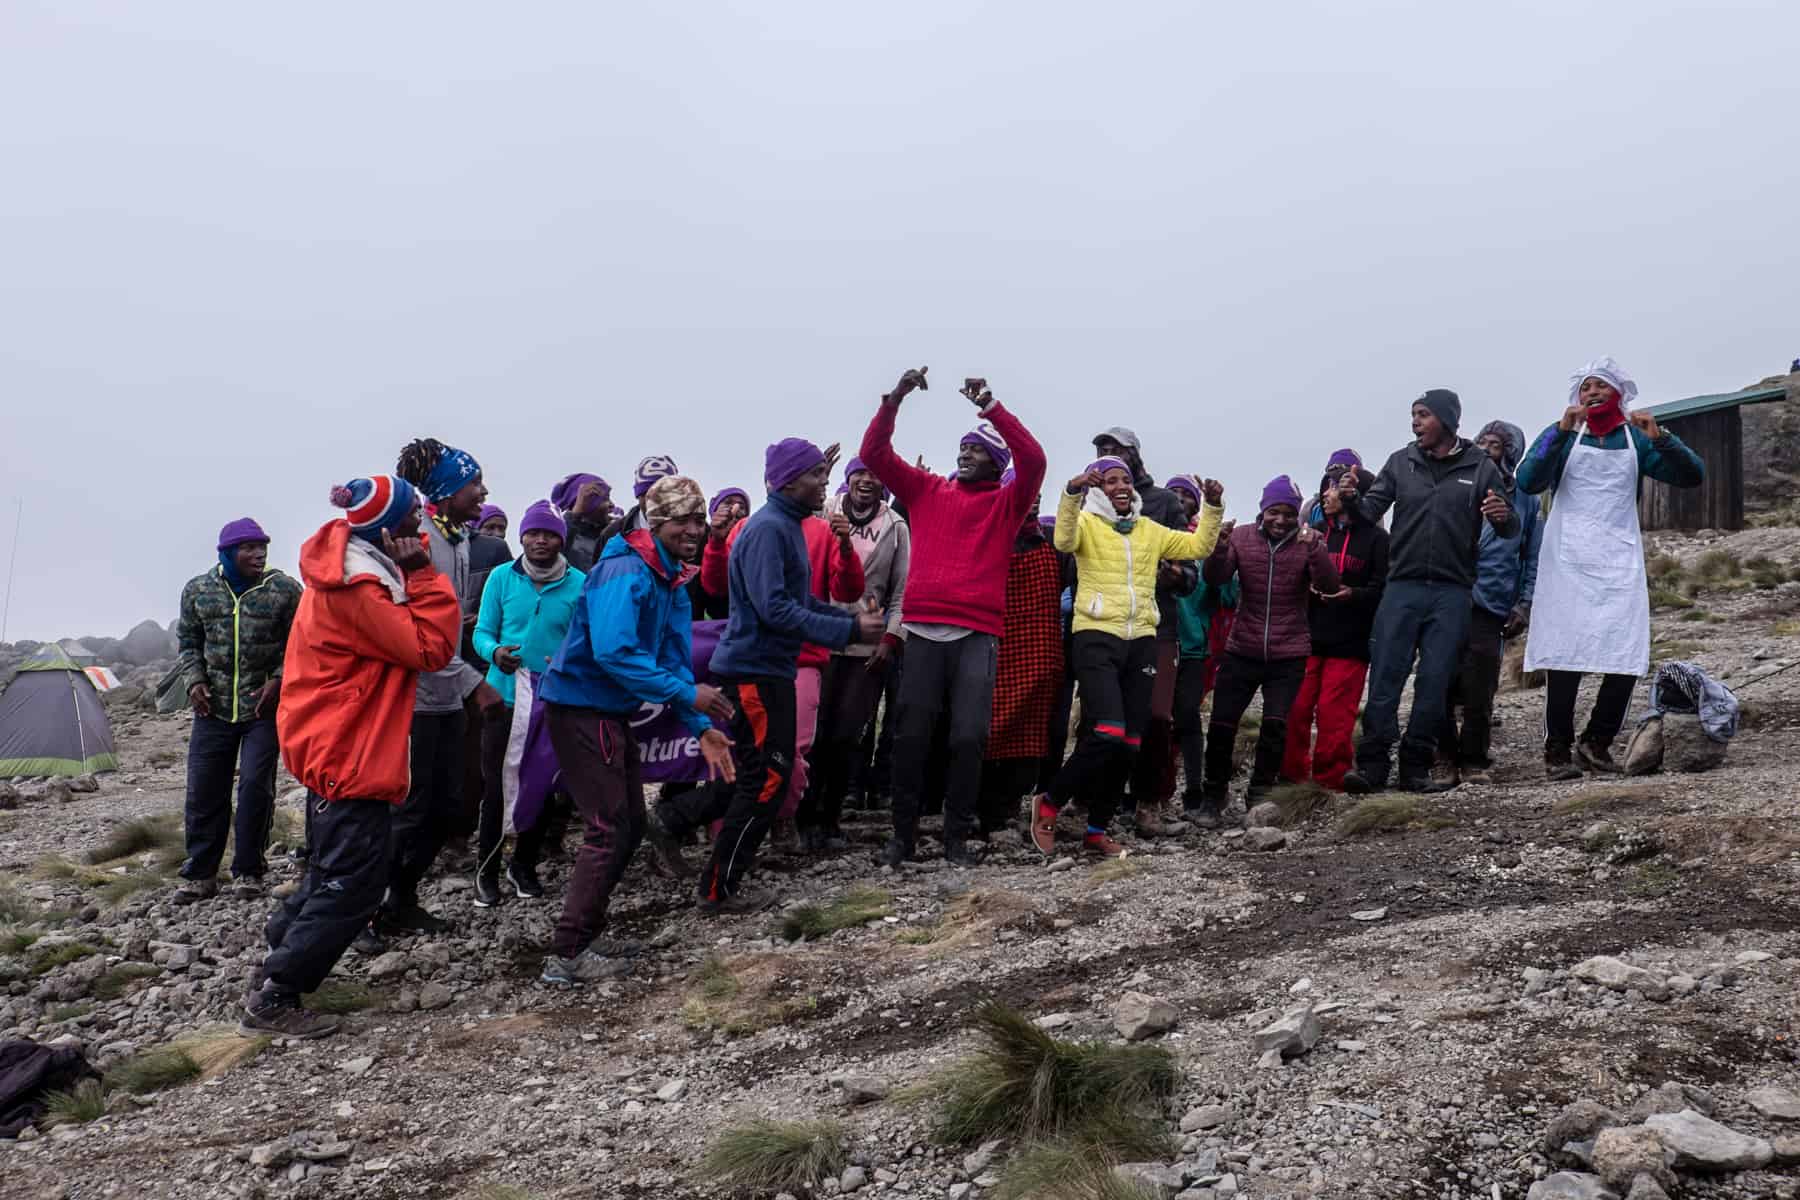 A group of 30 Kilimanjaro porters and guides sing and dance on a mountain slope covered in mist